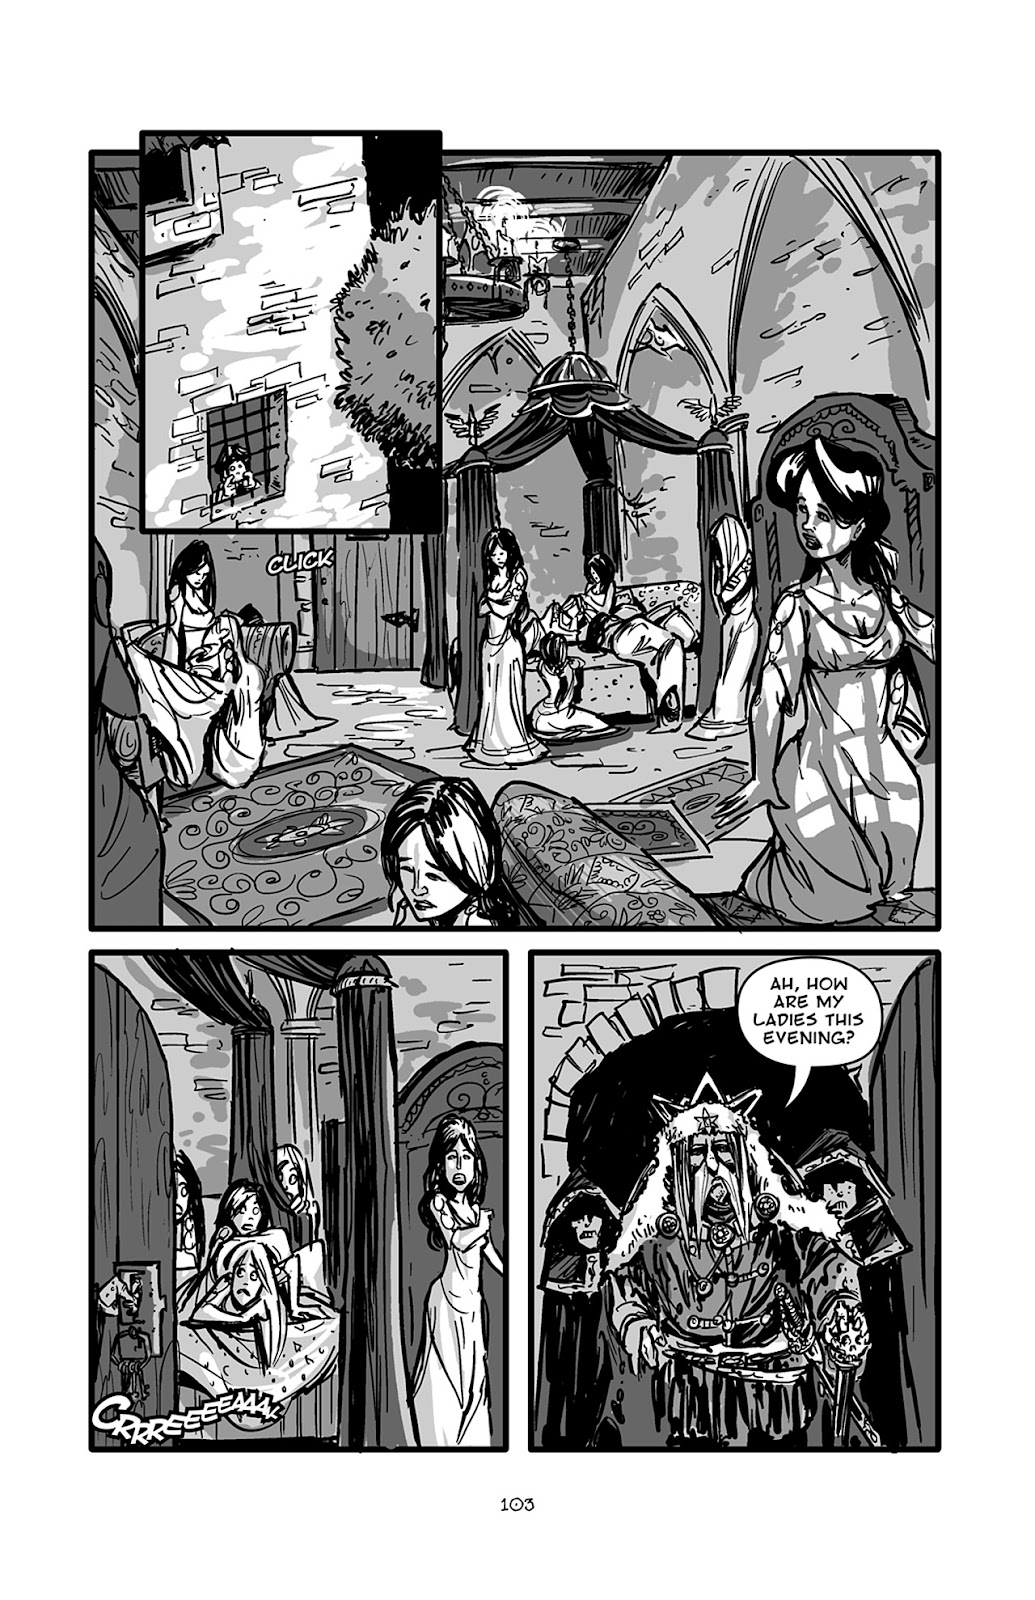 Pinocchio: Vampire Slayer - Of Wood and Blood issue 5 - Page 4